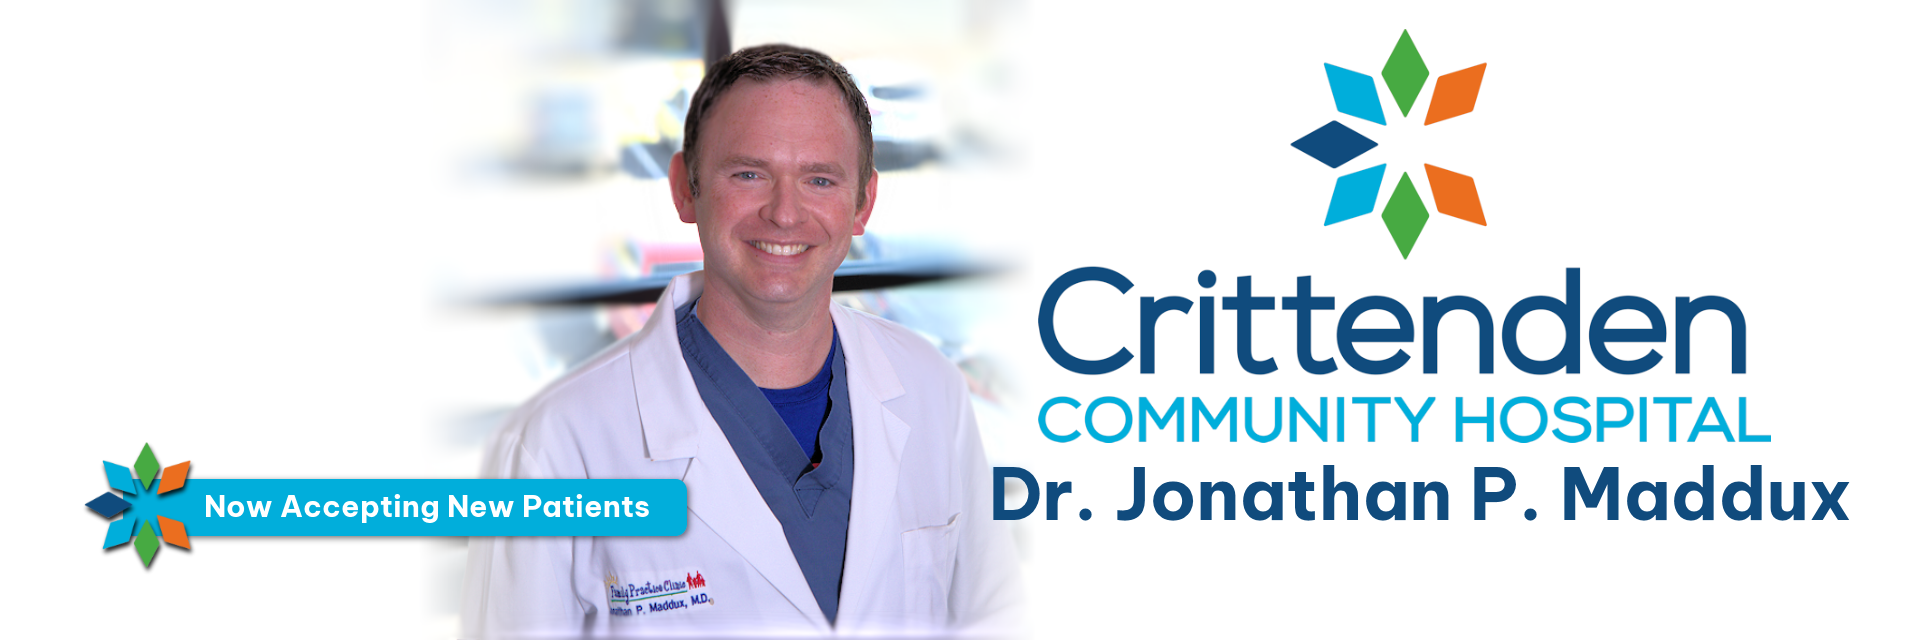 *Now Accepting New Patients
Crittenden COMMUNITY HOSPITAL 
Dr. Jonathan P. Maddux